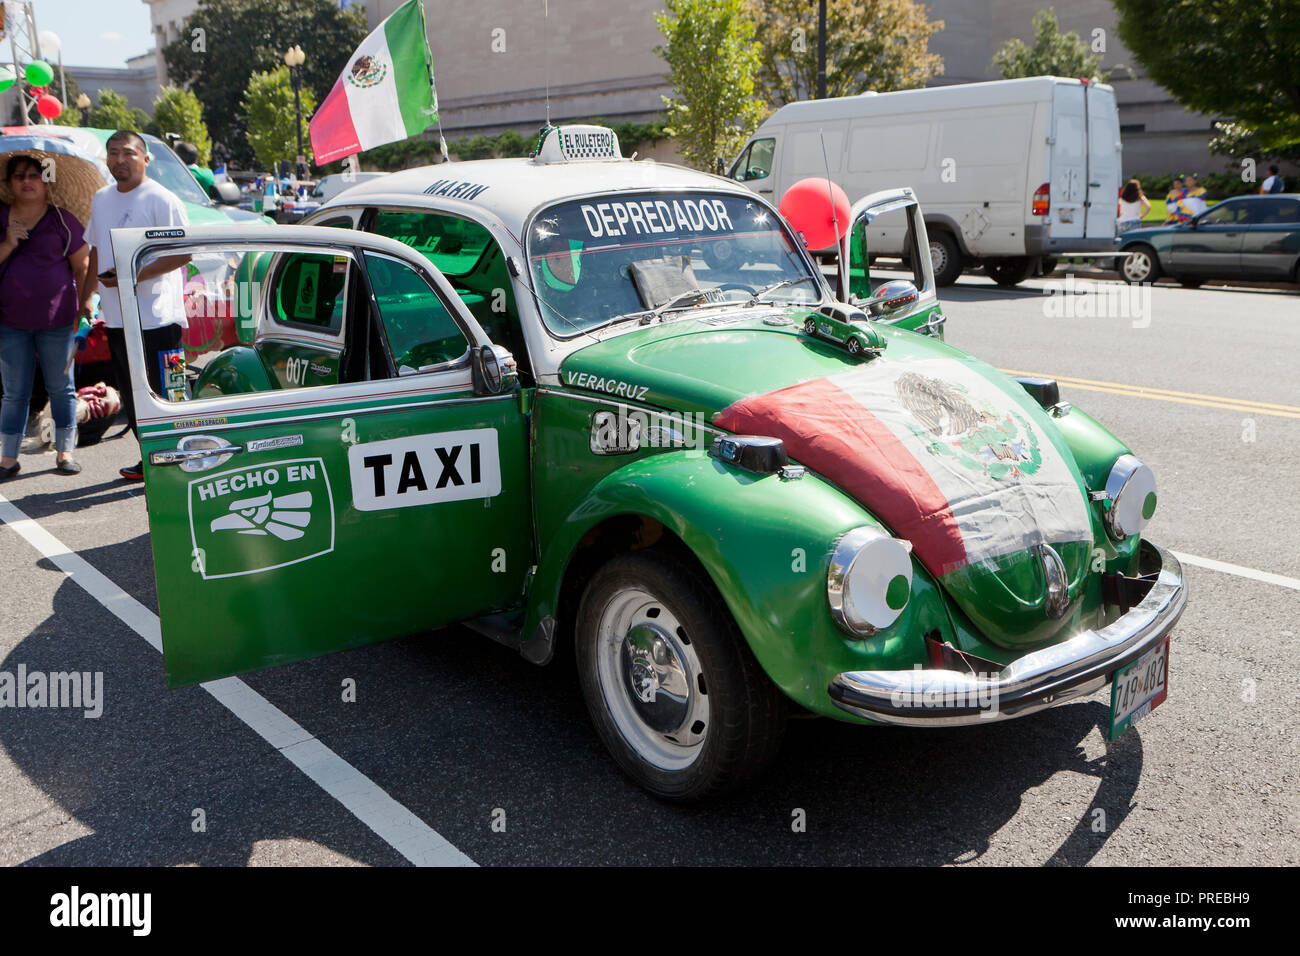 Vintage 1970's Volkswagen Beetle taxi (VW bug taxi) - USA Stock Photo